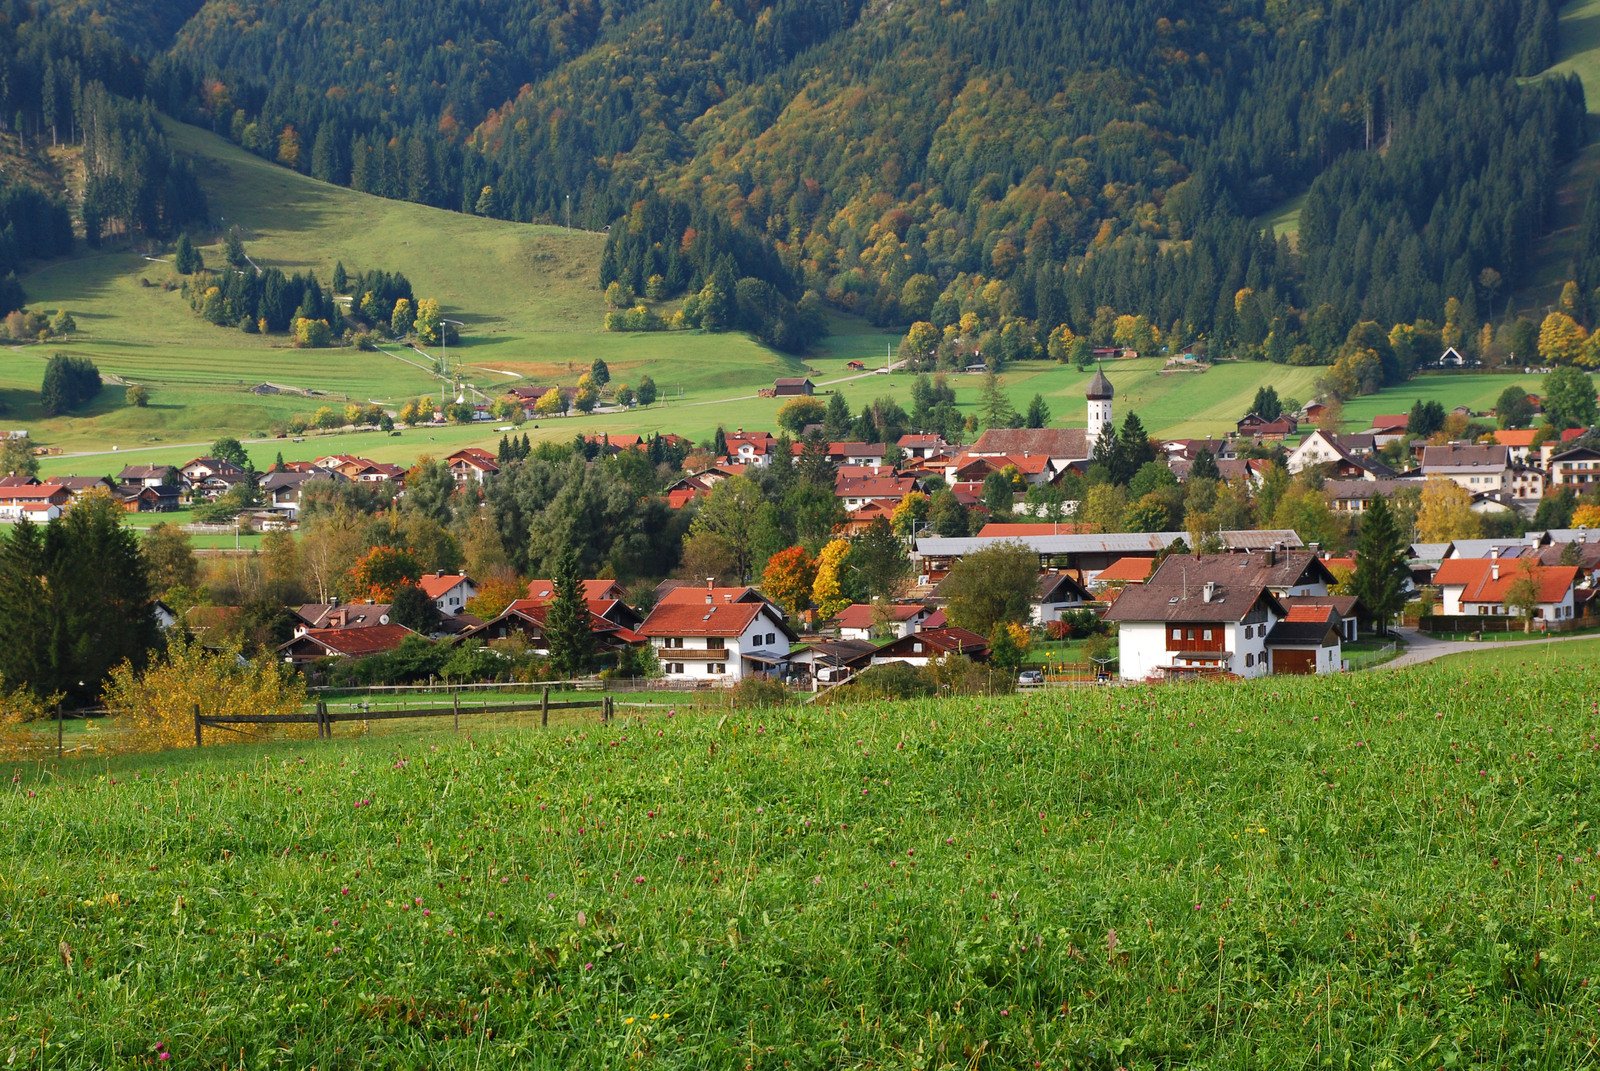 a rural town nestled in a valley with lush green trees